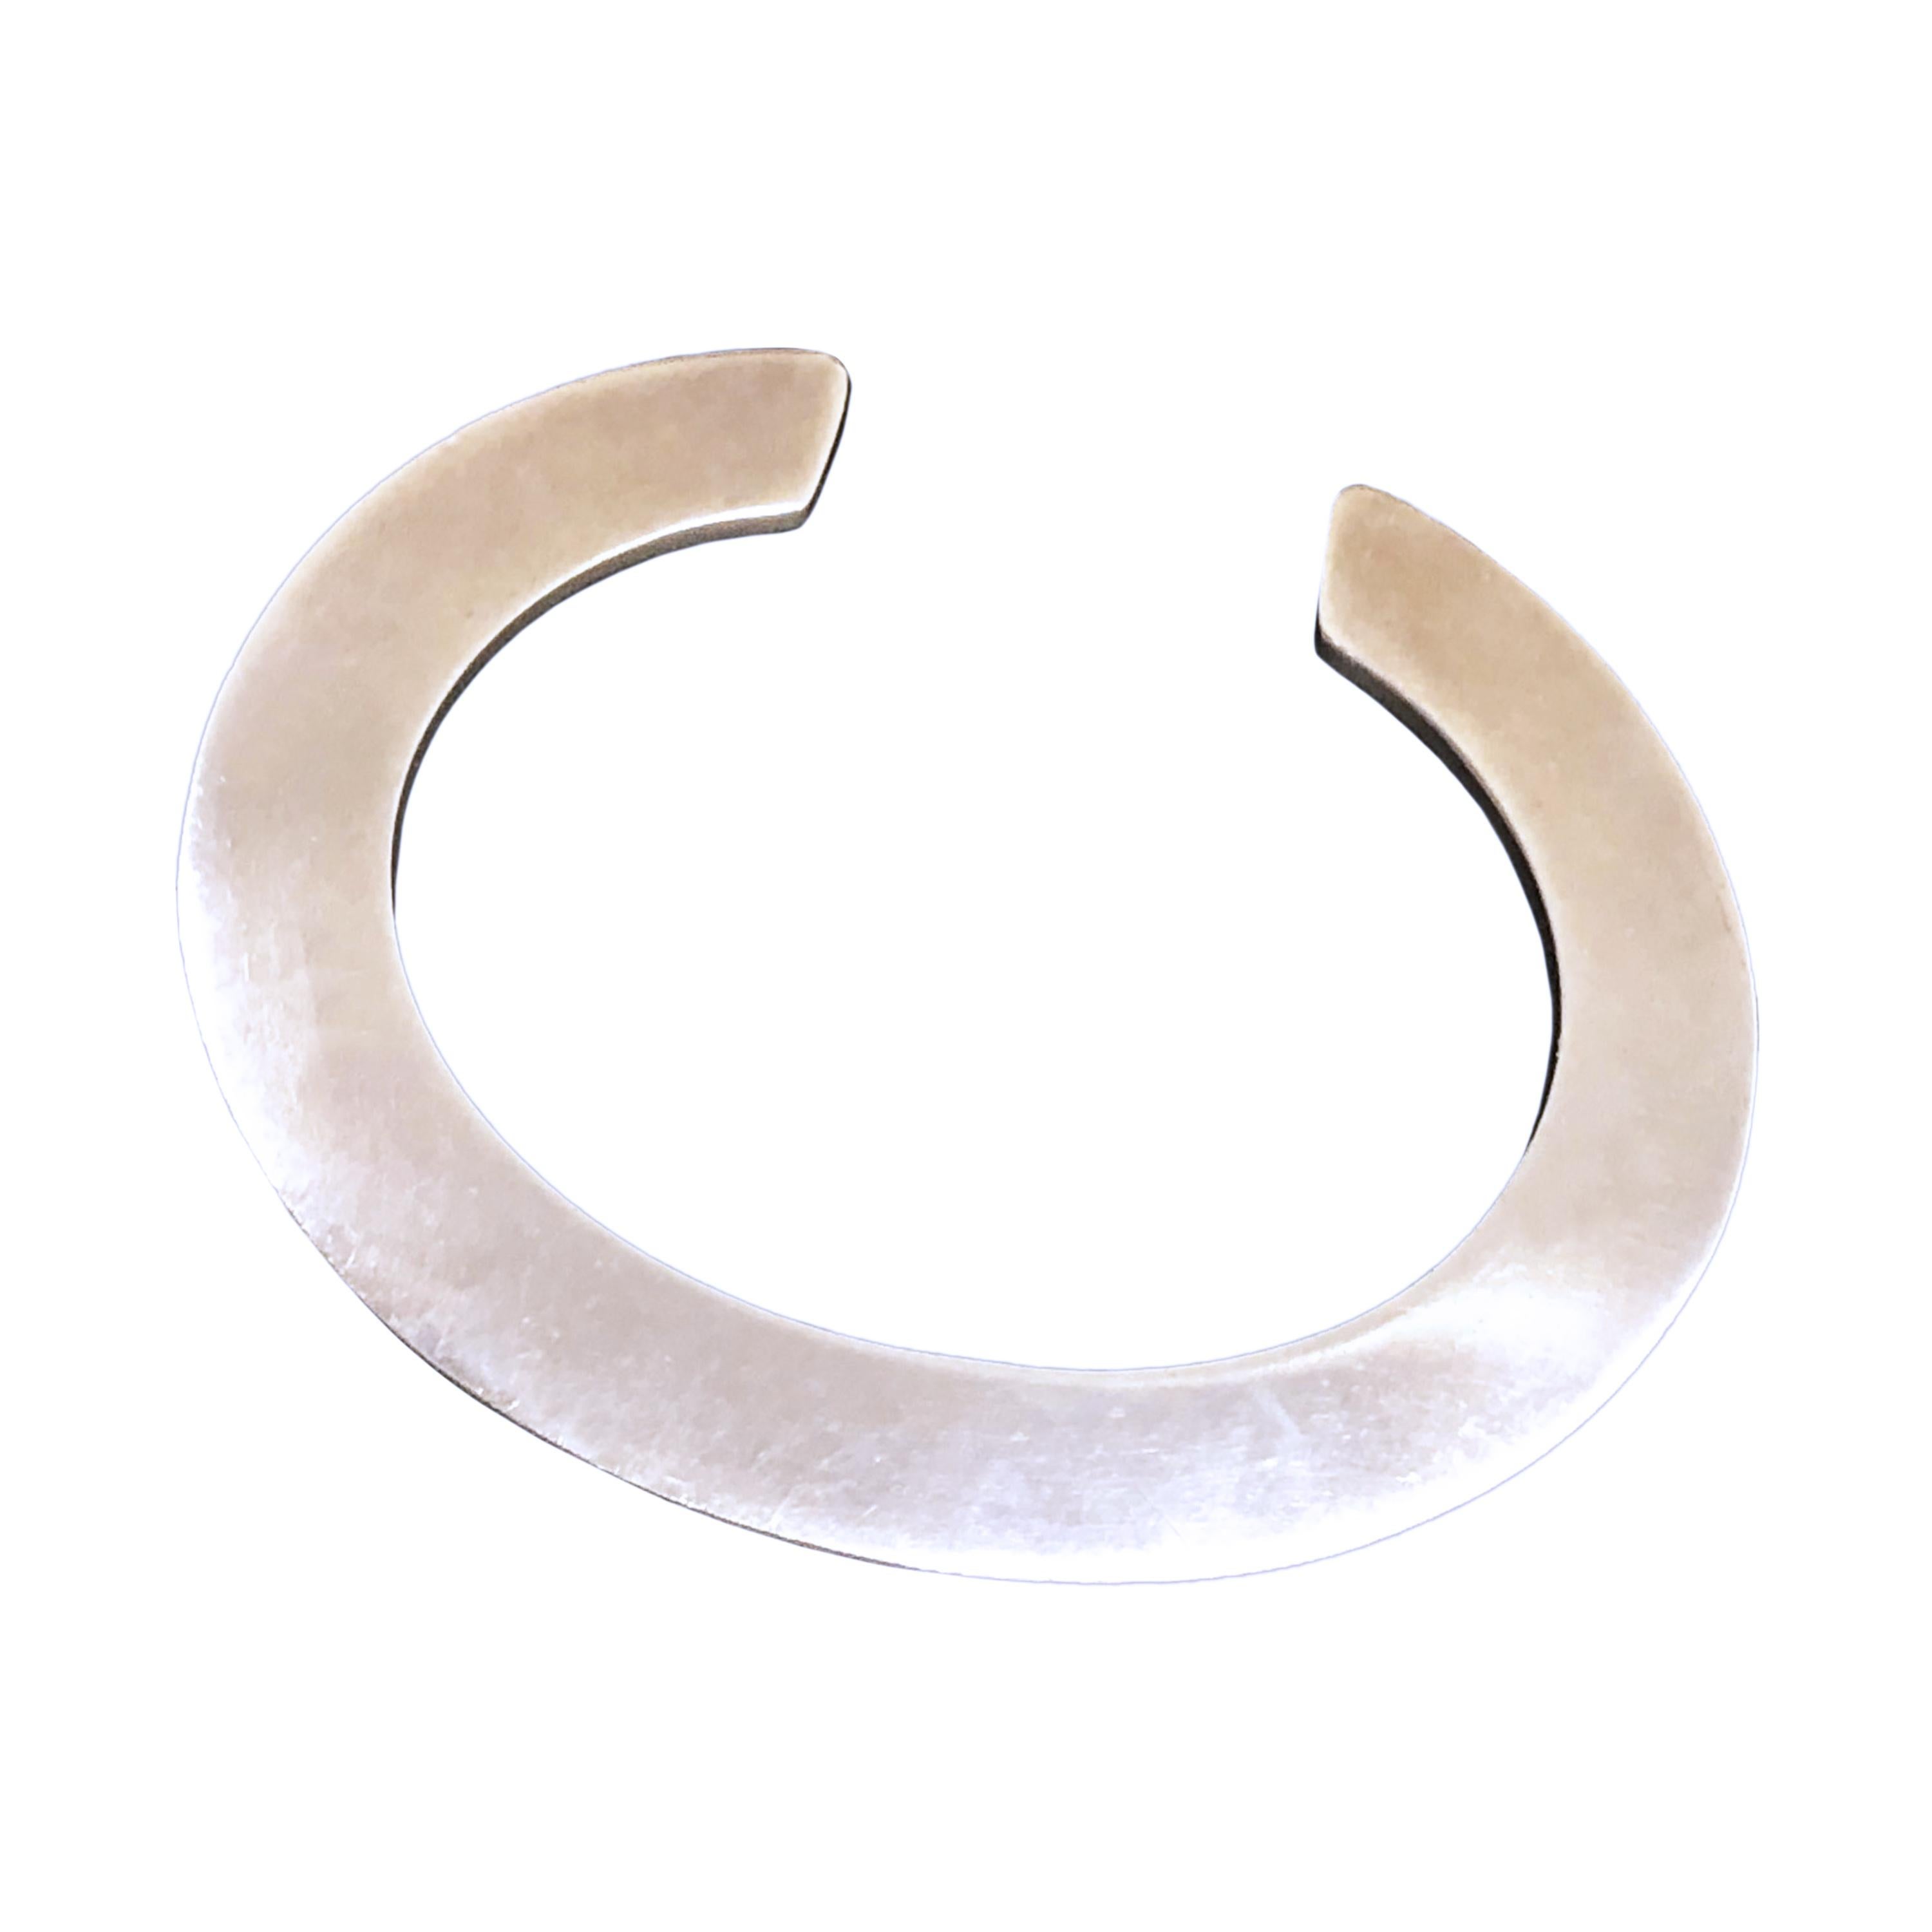 Circa 1960 Sterling Silver Mid Century Modern Design flat Cuff Bracelet for Tiffany & Company by Anton Michelsen,  Designer, Silversmith whom studied under Georg Jensen. This unique bracelet  measures 3 M.M. thick, 3/8 inch thick, has a 1 inch wide